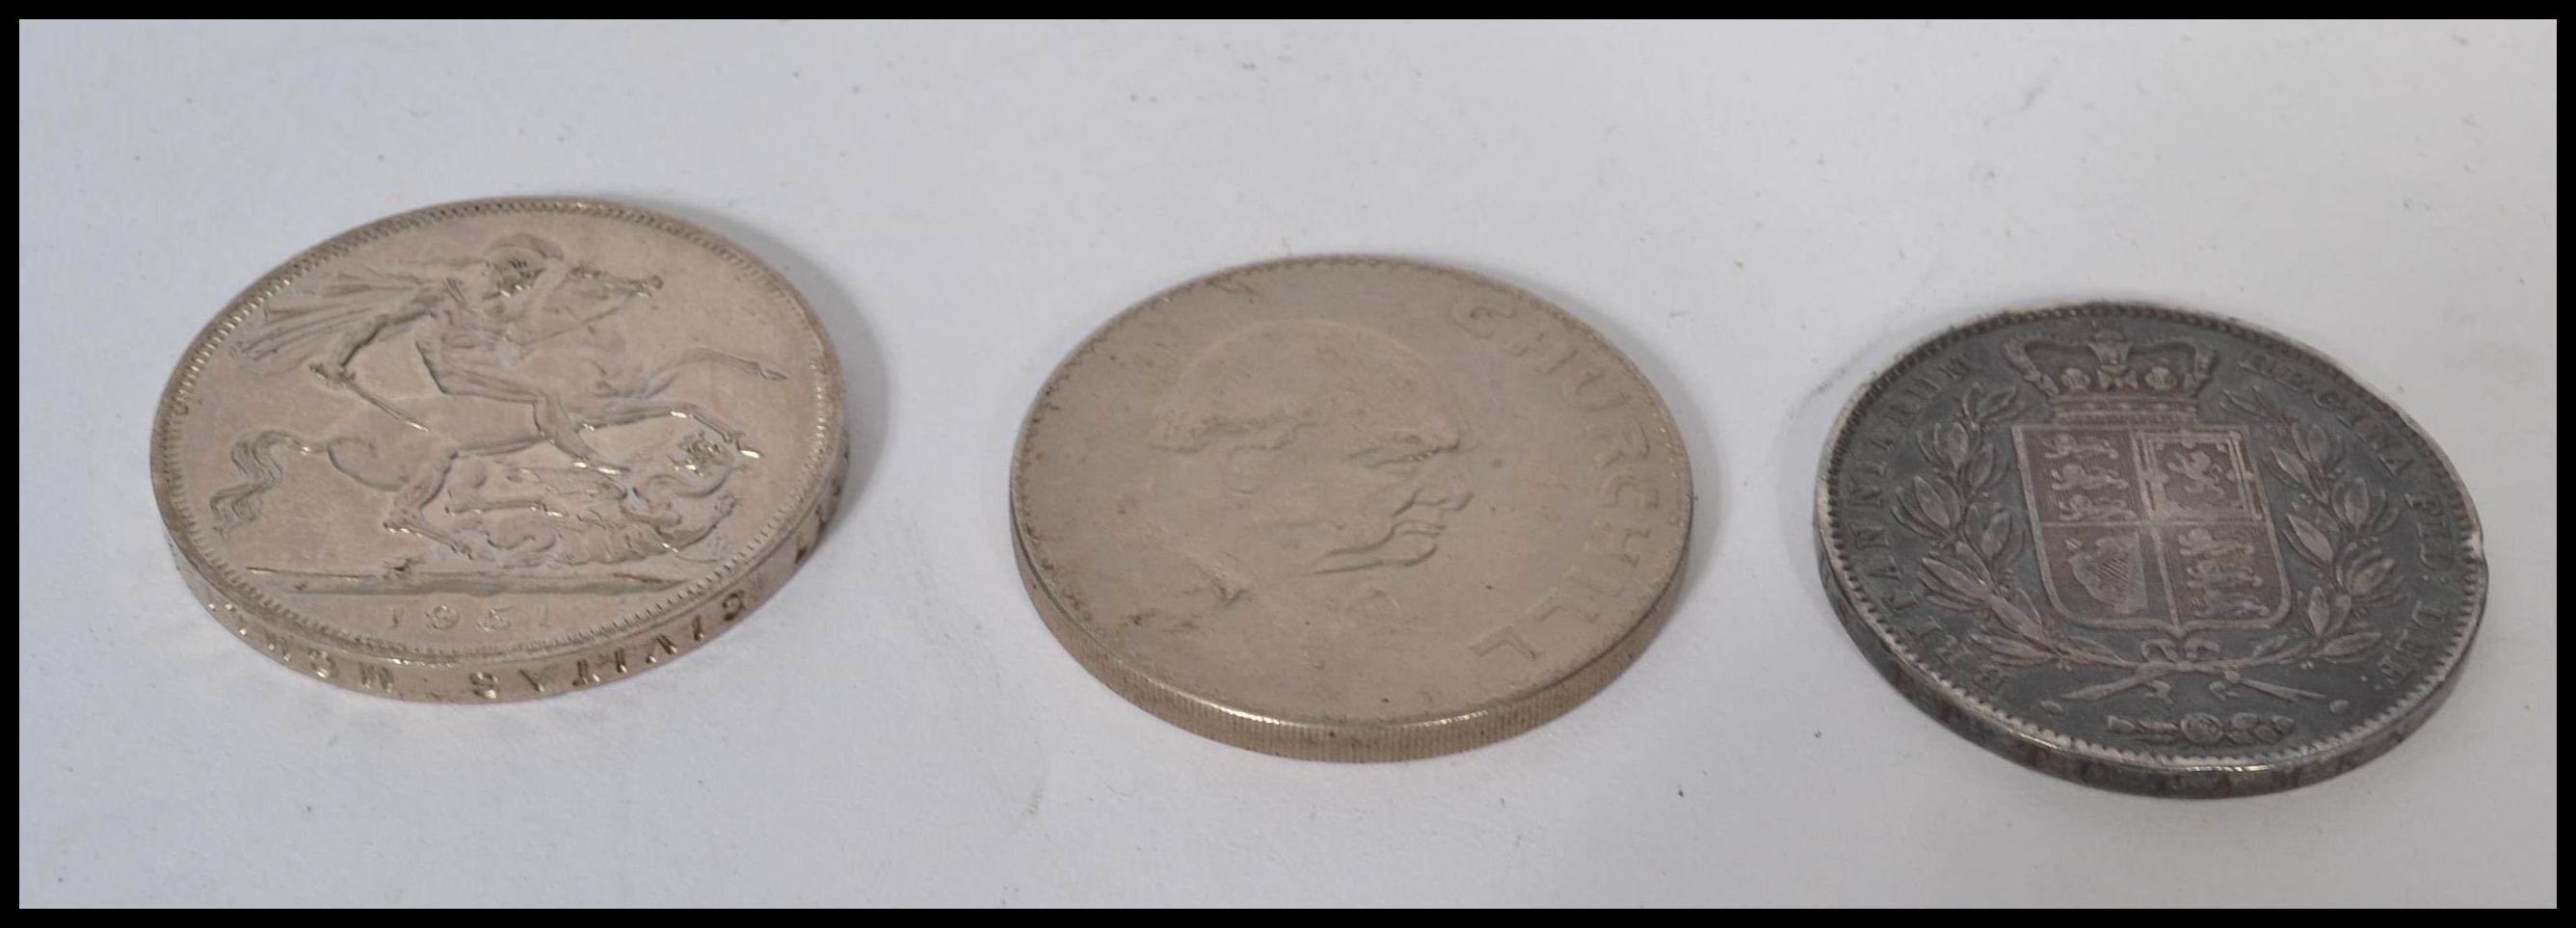 A first half of the 19th century young Victoria bust silver crown dating to 1845 together with a - Image 2 of 3